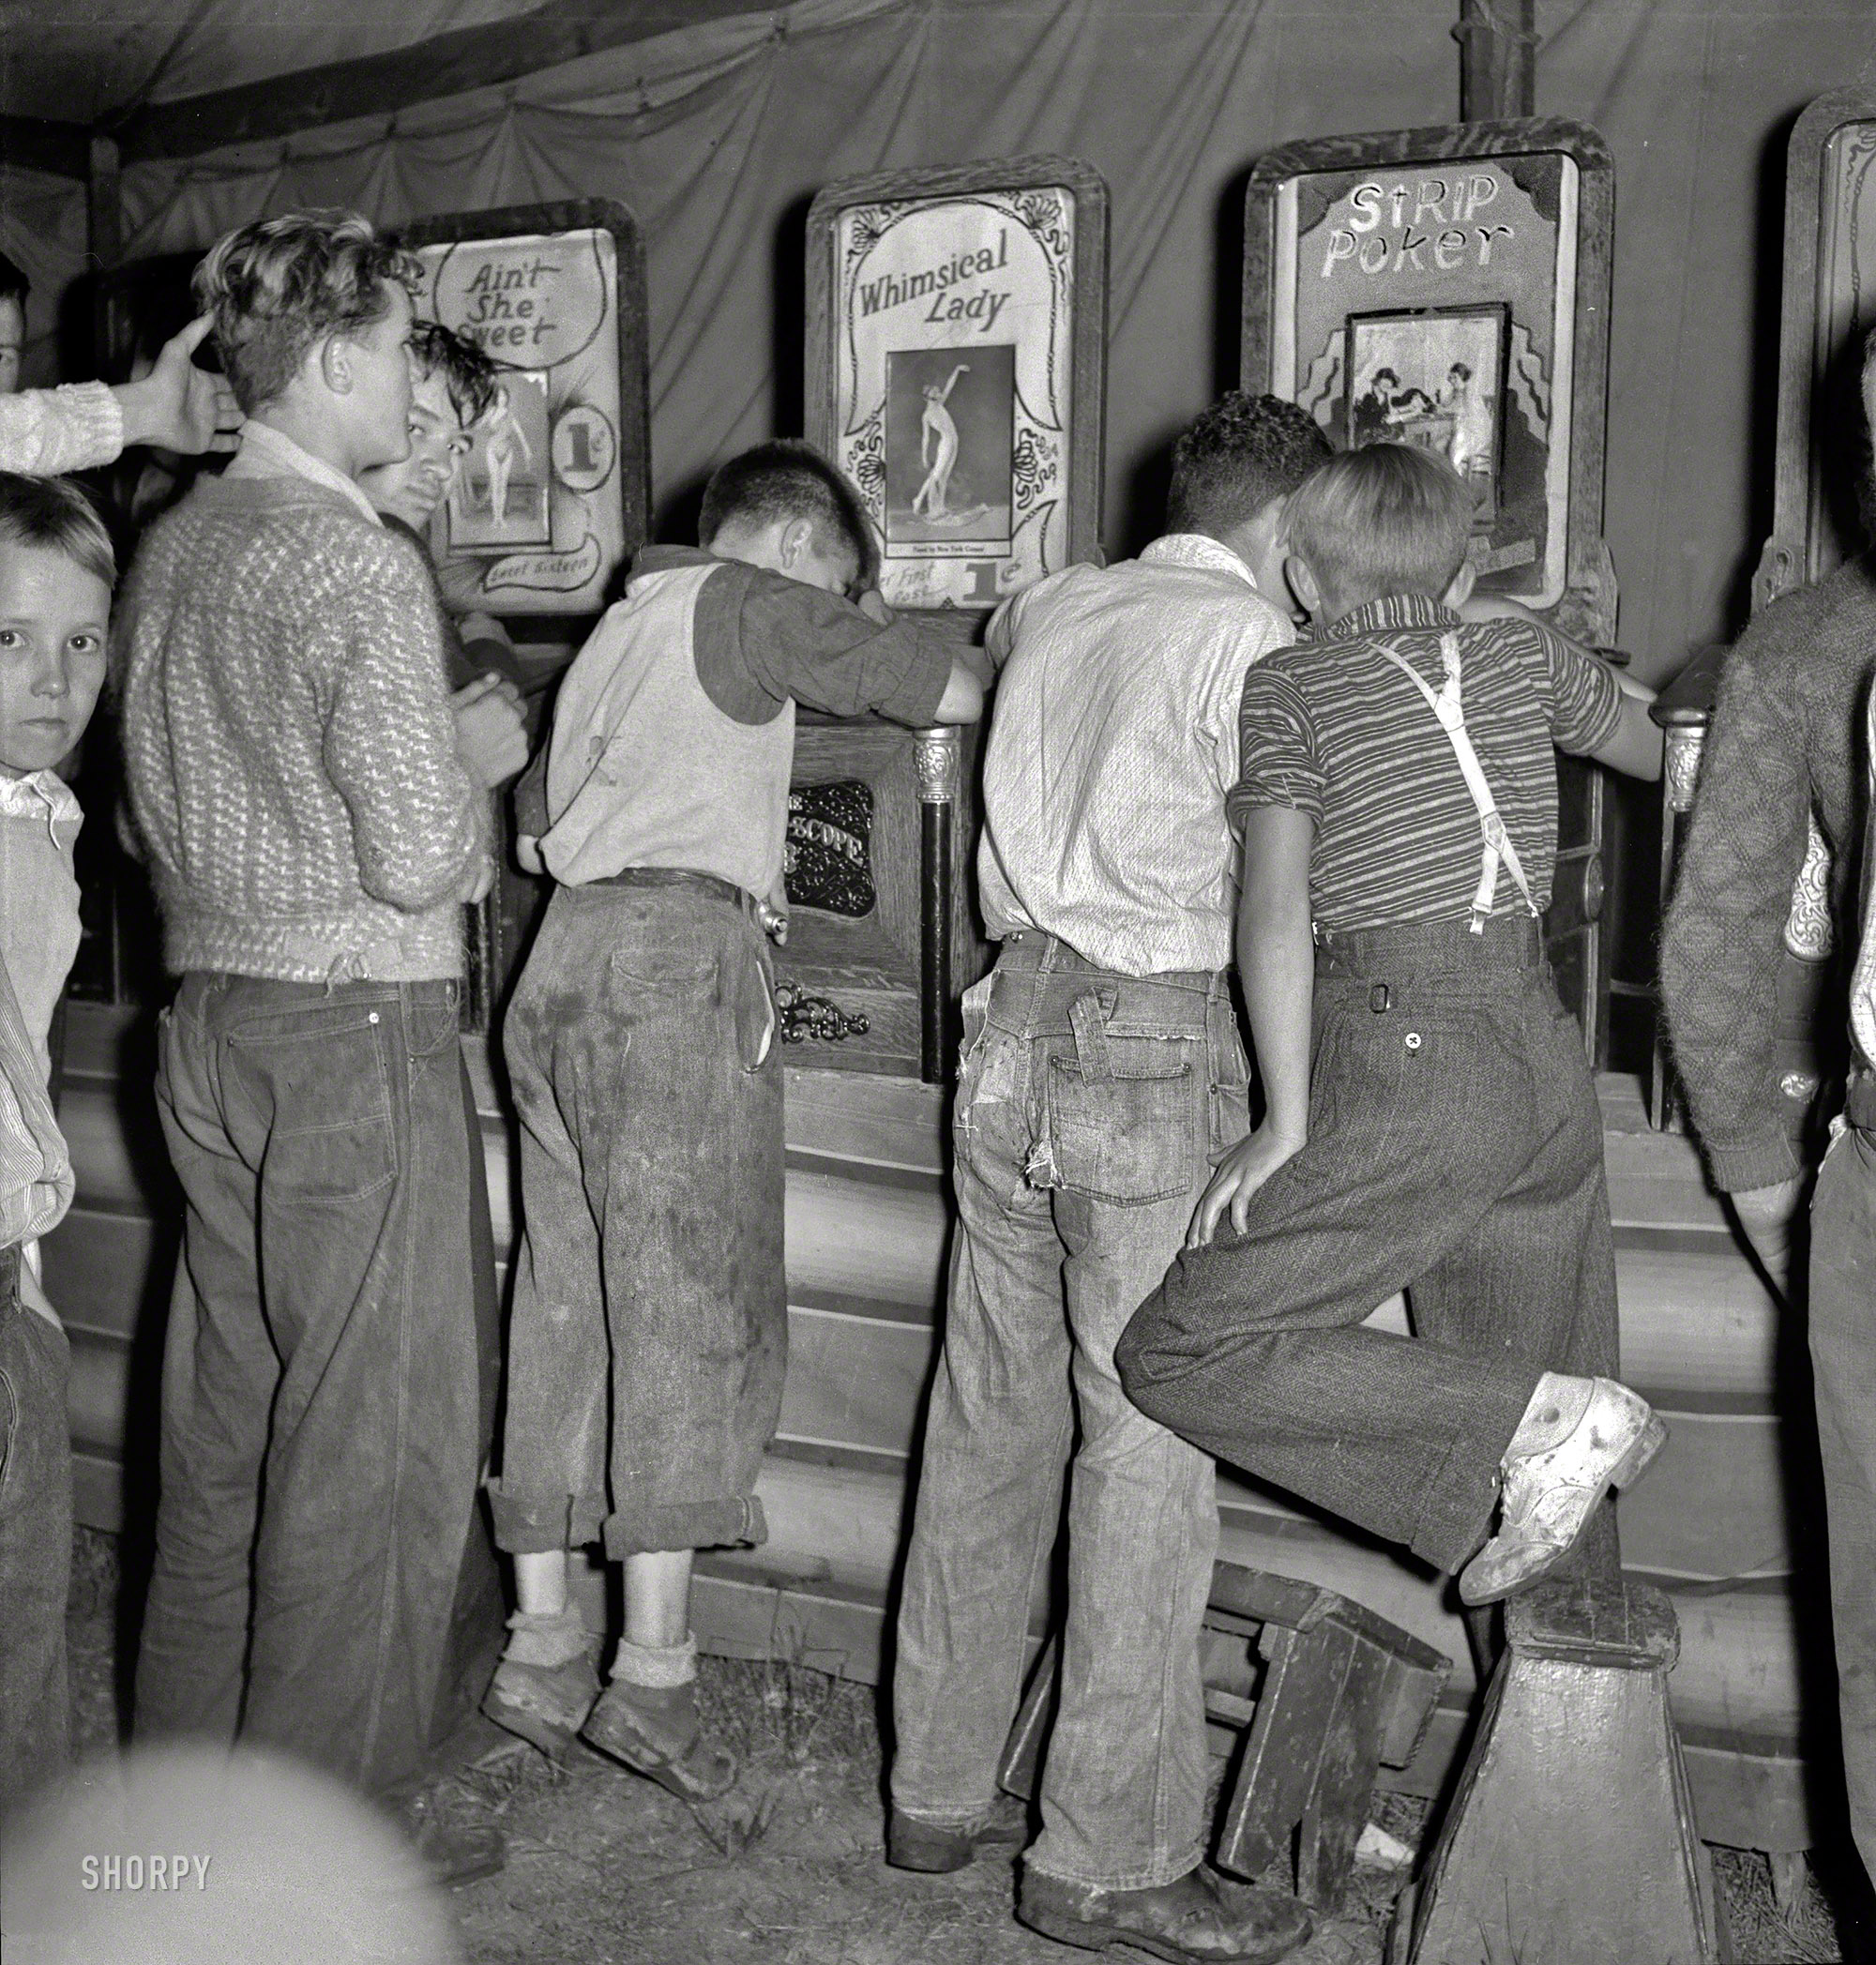 September 1938. " 'It's a dirty gyp,' say the mine workers' sons in the penny arcade at outdoor carnival. Granville, West Virginia." Stepstools helpfully provided for the shorter cineastes. Photo by Marion Post Wolcott. View full size.